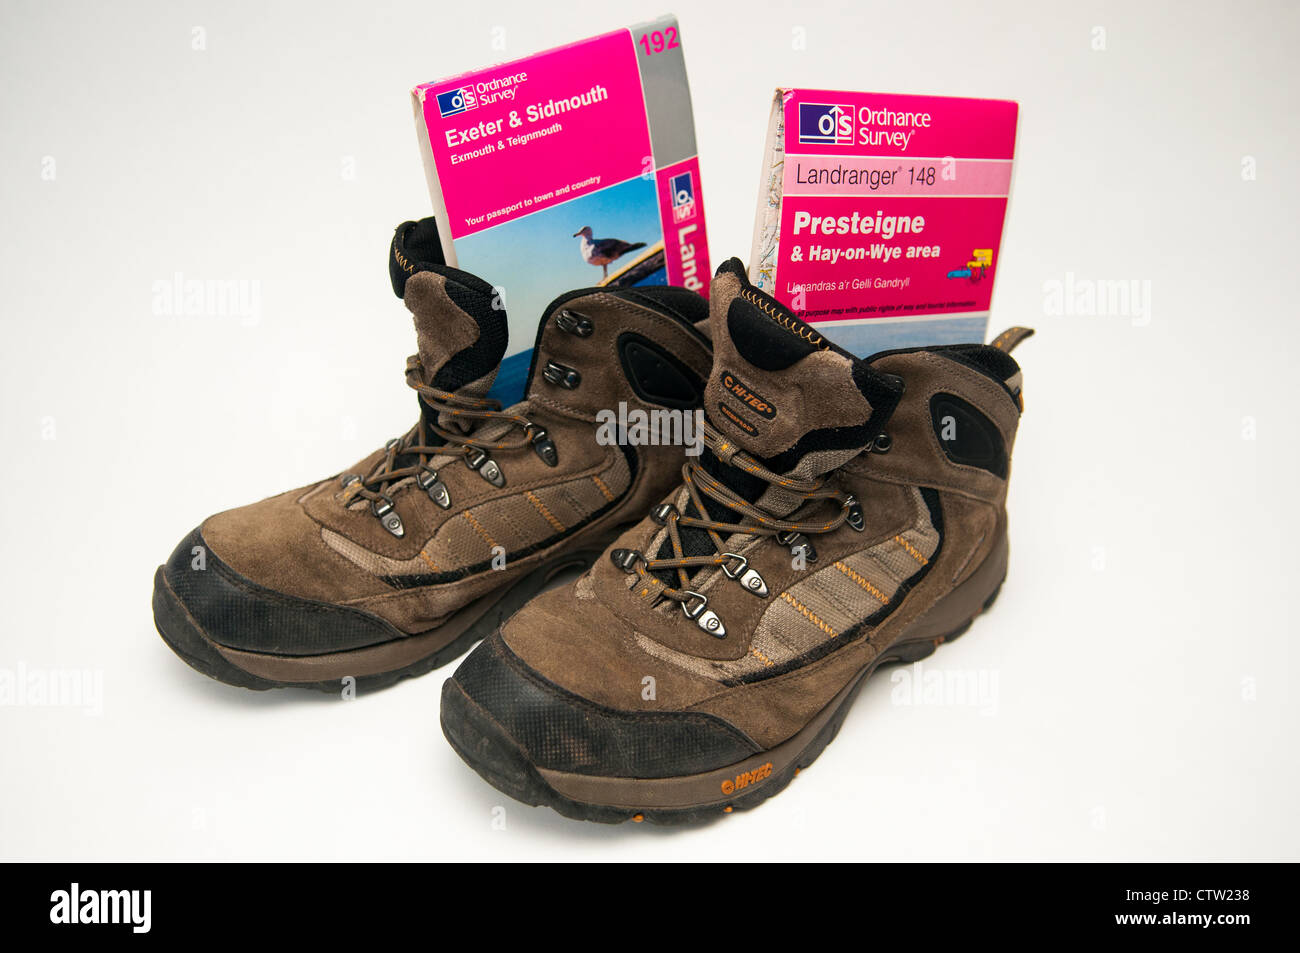 Walking boots with Presteigne and Exeter and Sidmouth OS maps Stock Photo